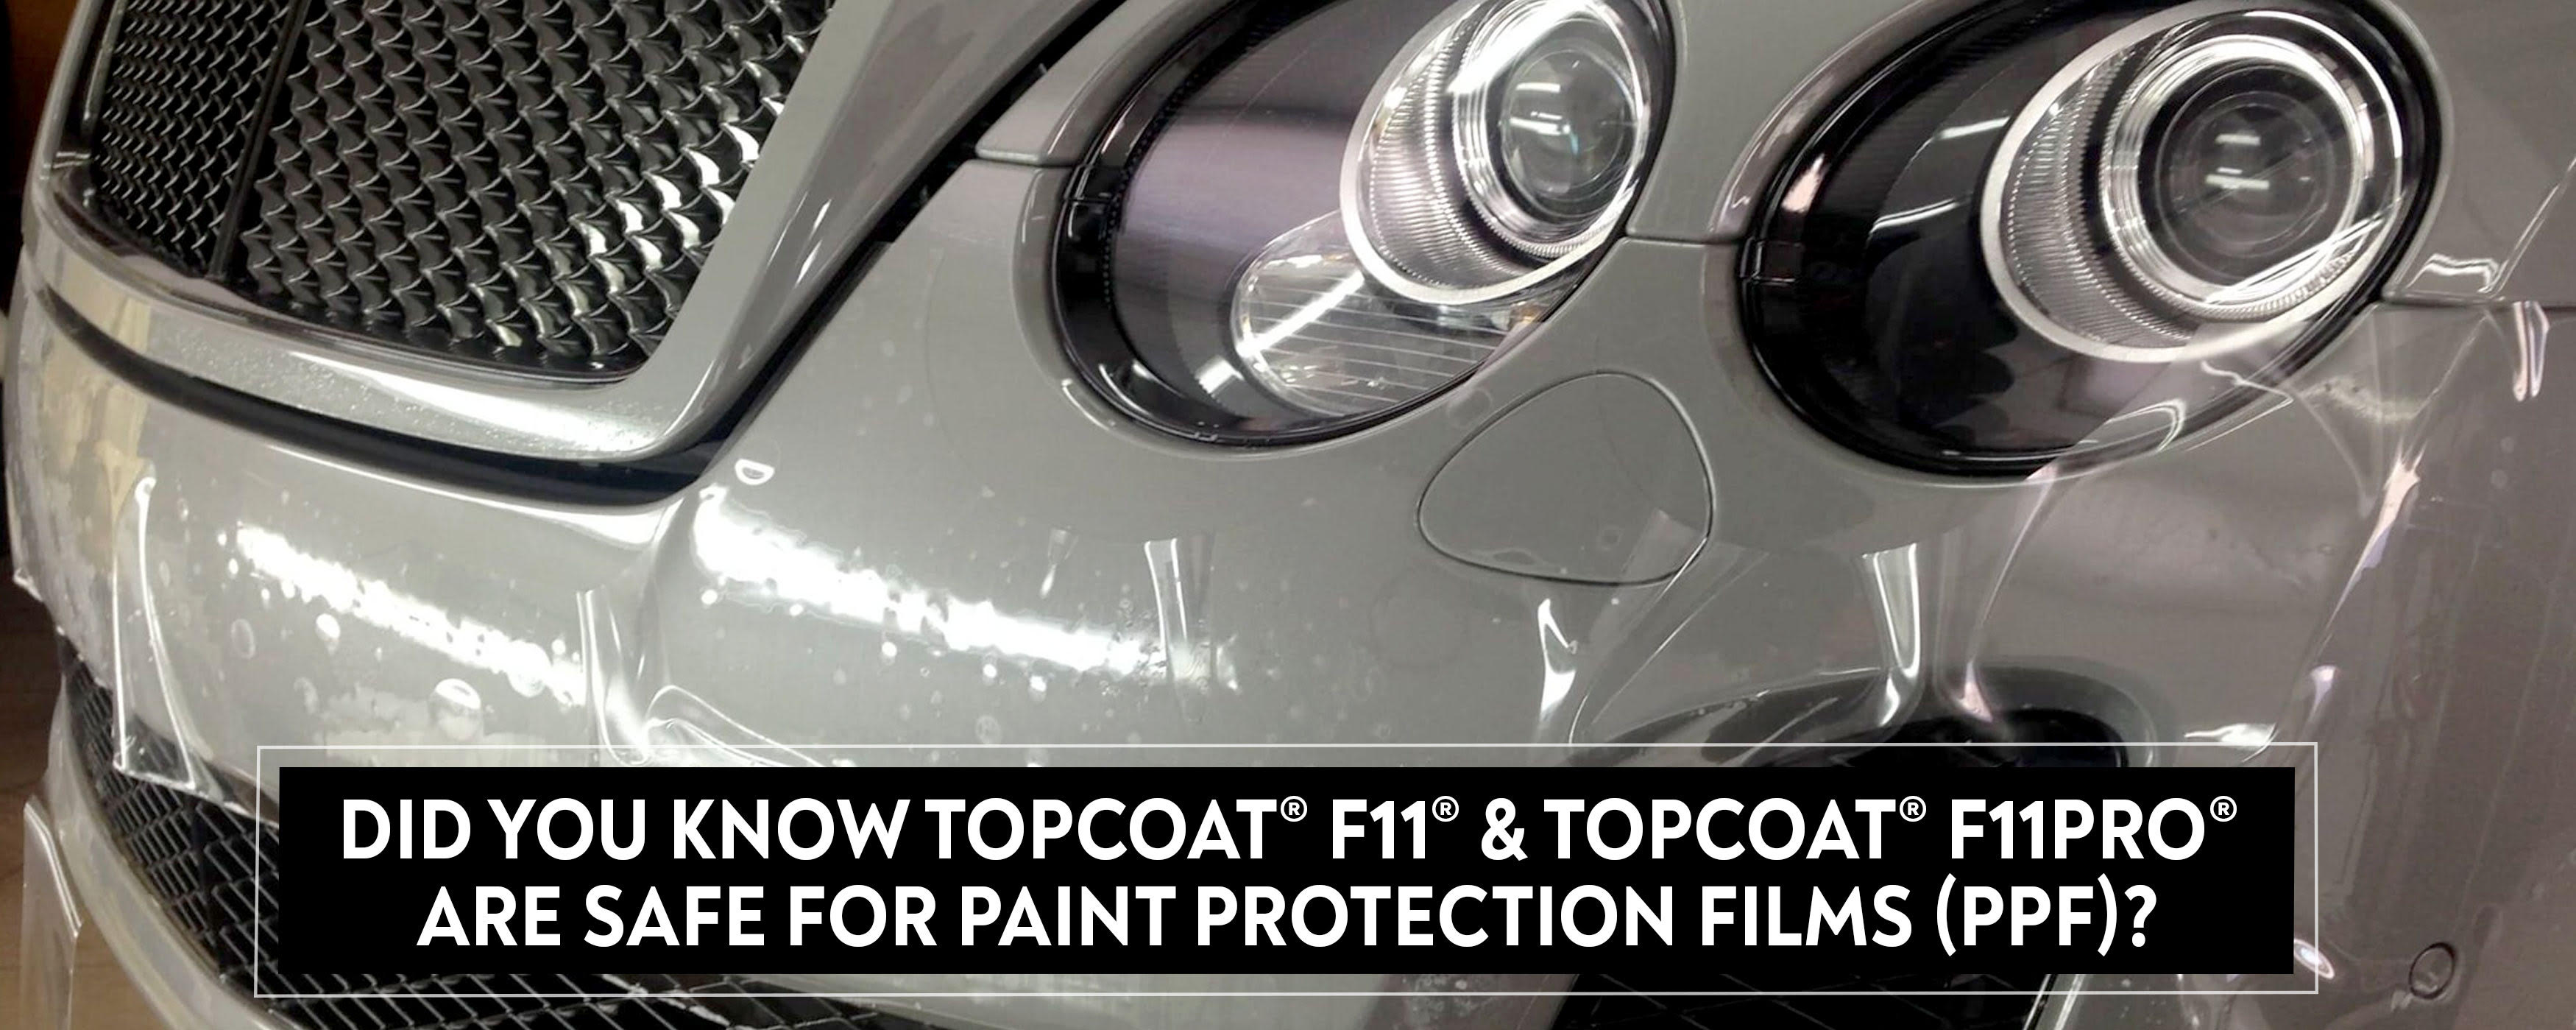 Did You Know TopCoat F11® and TopCoat F11PRO® are Safe for Paint Protection Films (PPF)?